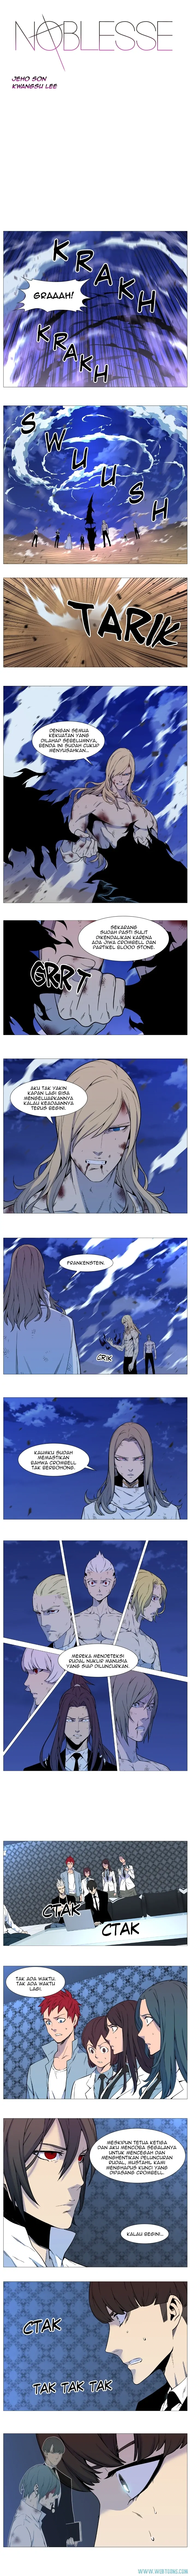 Noblesse Chapter 542 - 37